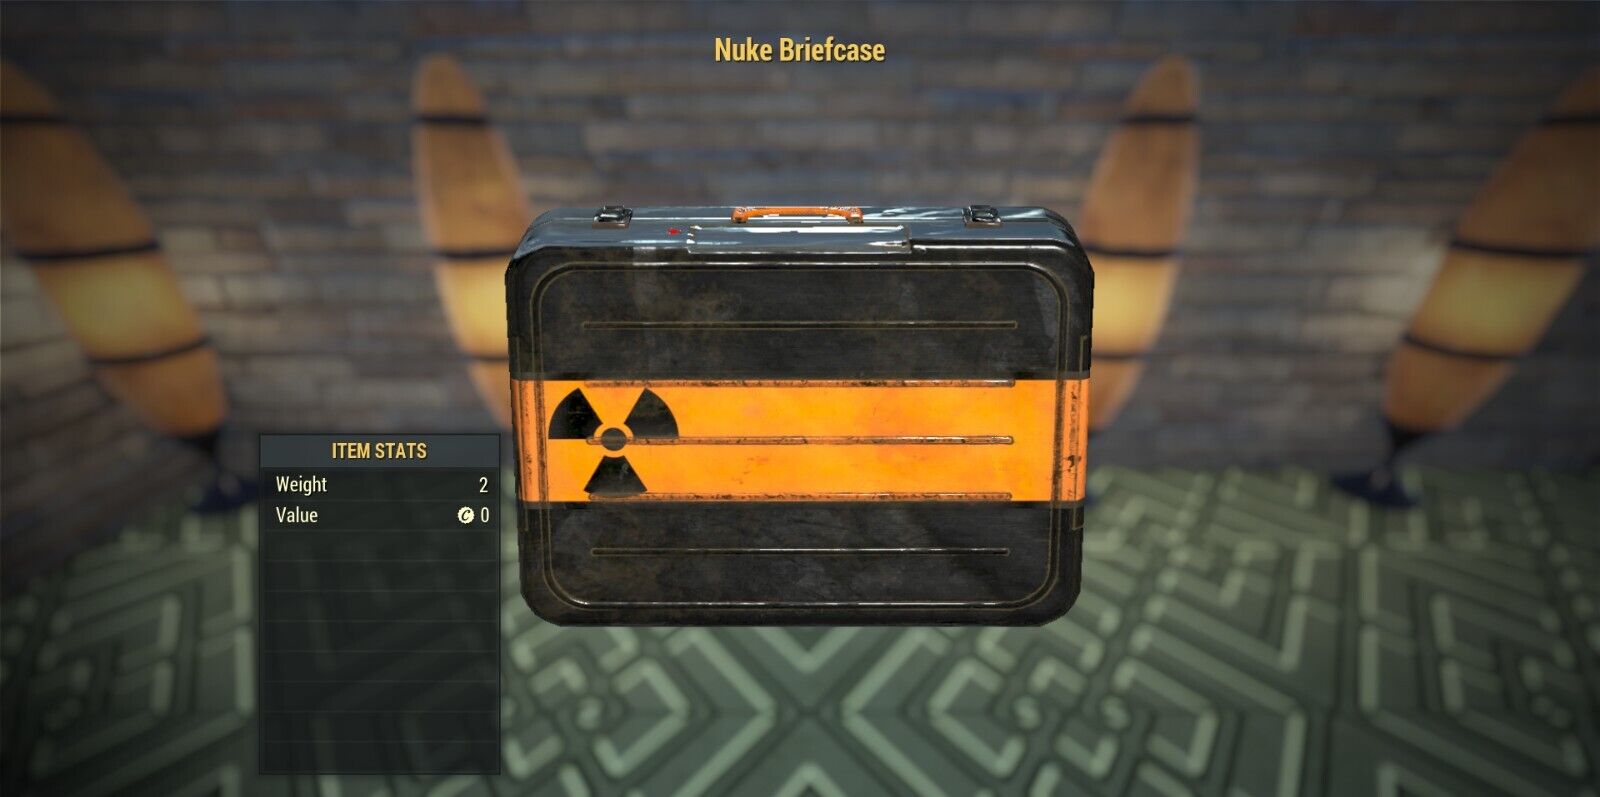 ⭐⭐⭐ (PC) Extremely Rare Dev-Room Nuclear Briefcase (Camp Display Item) ⭐⭐⭐